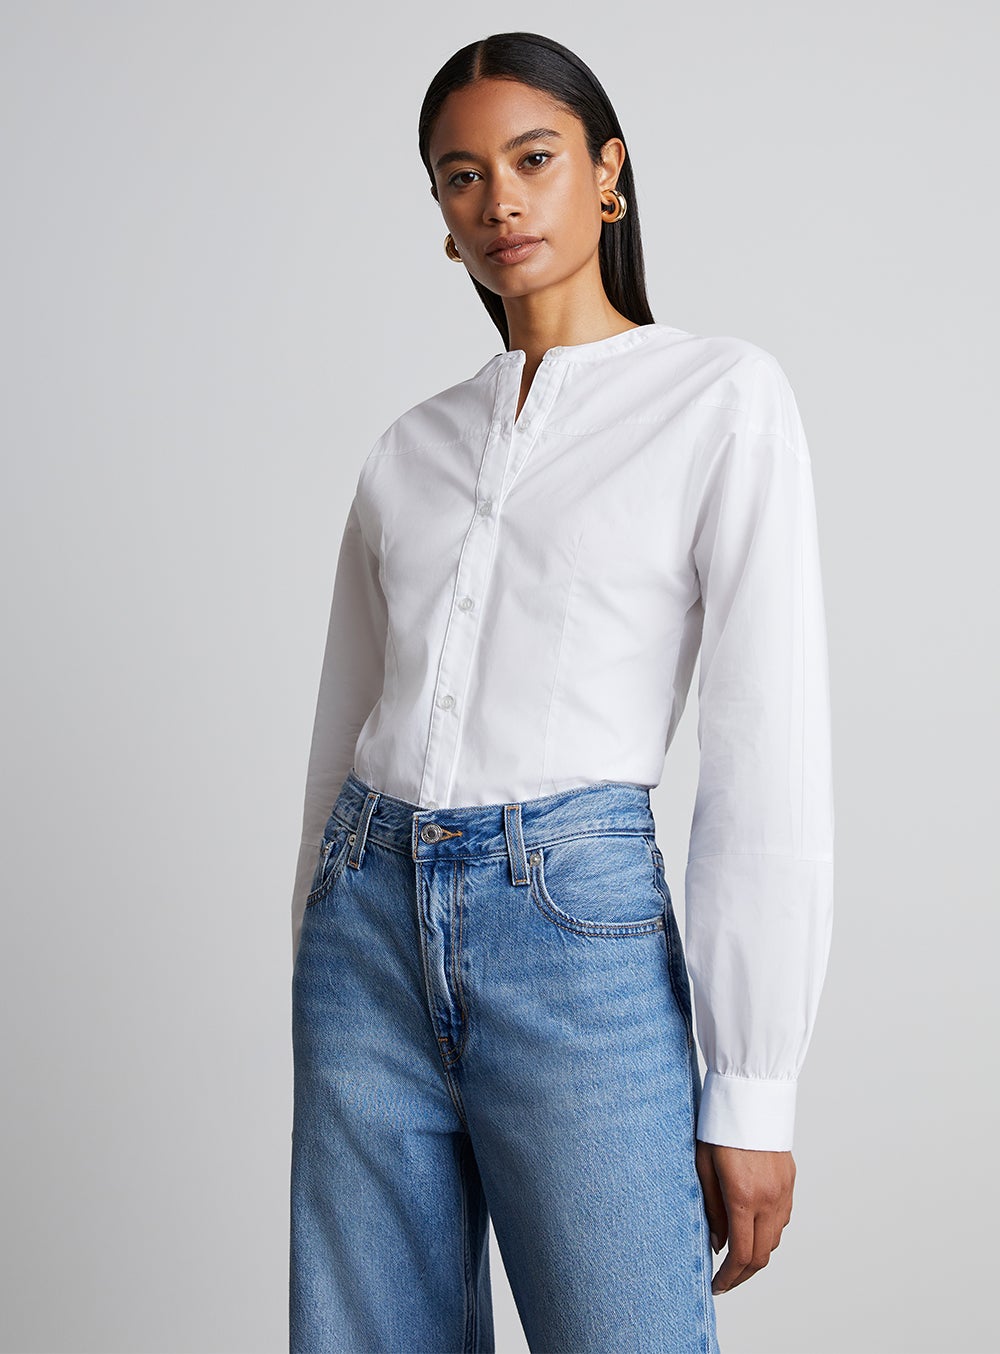 10 Stylish Button-Down-Shirt Outfits for Women in 2022 | Who What Wear